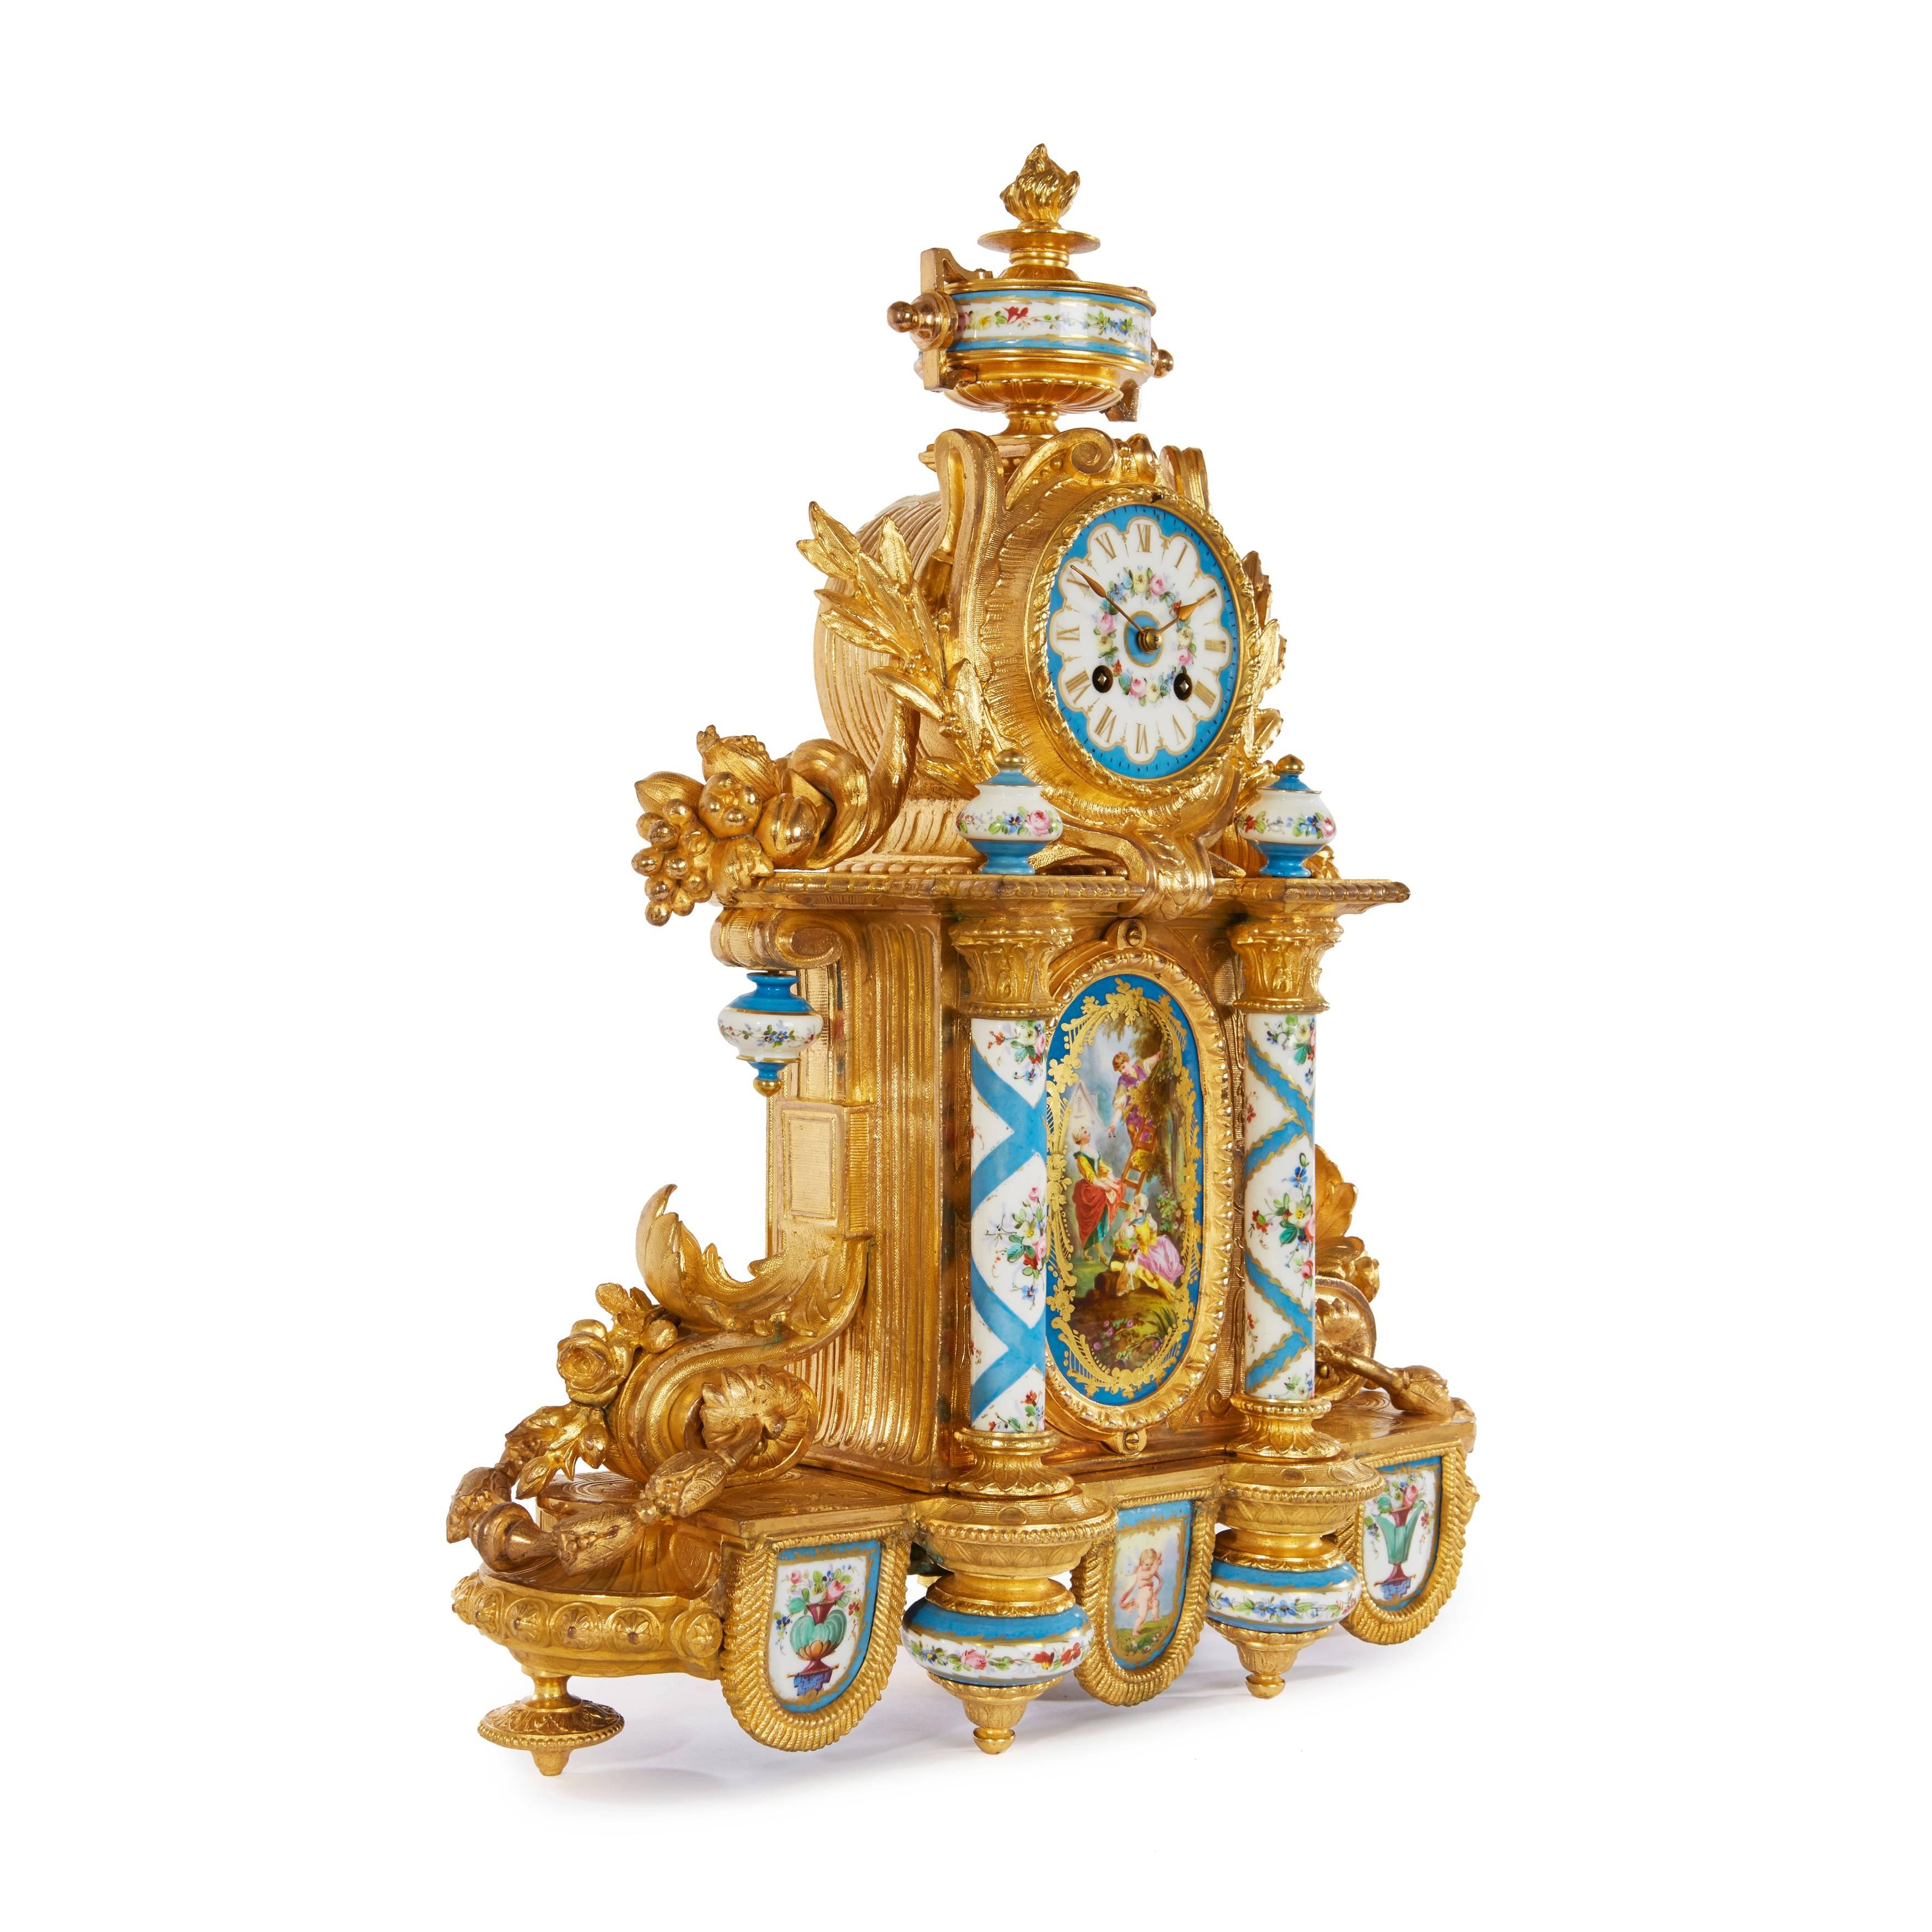 French Rococo Style Ormolu and Porcelain Antique Mantel Clock